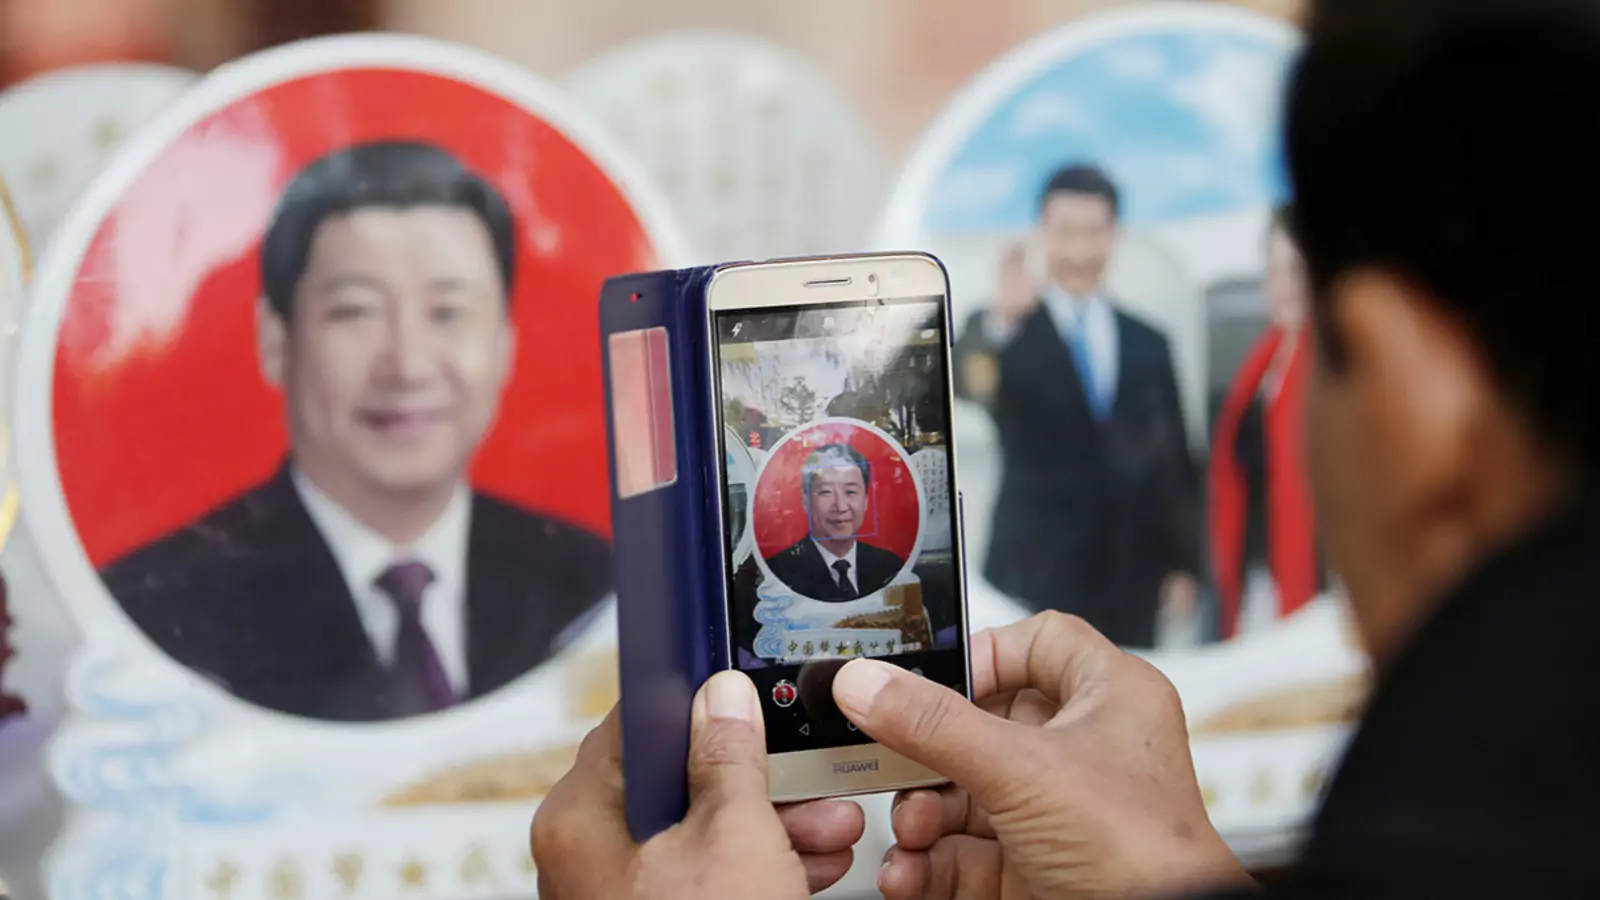 During the Nineteenth Party Congress of the Chinese Communist Party in Beijing in 2017, a tourist photographs a souvenir plate featuring Chinese President Xi Jinping in a shop near Tiananmen Square.